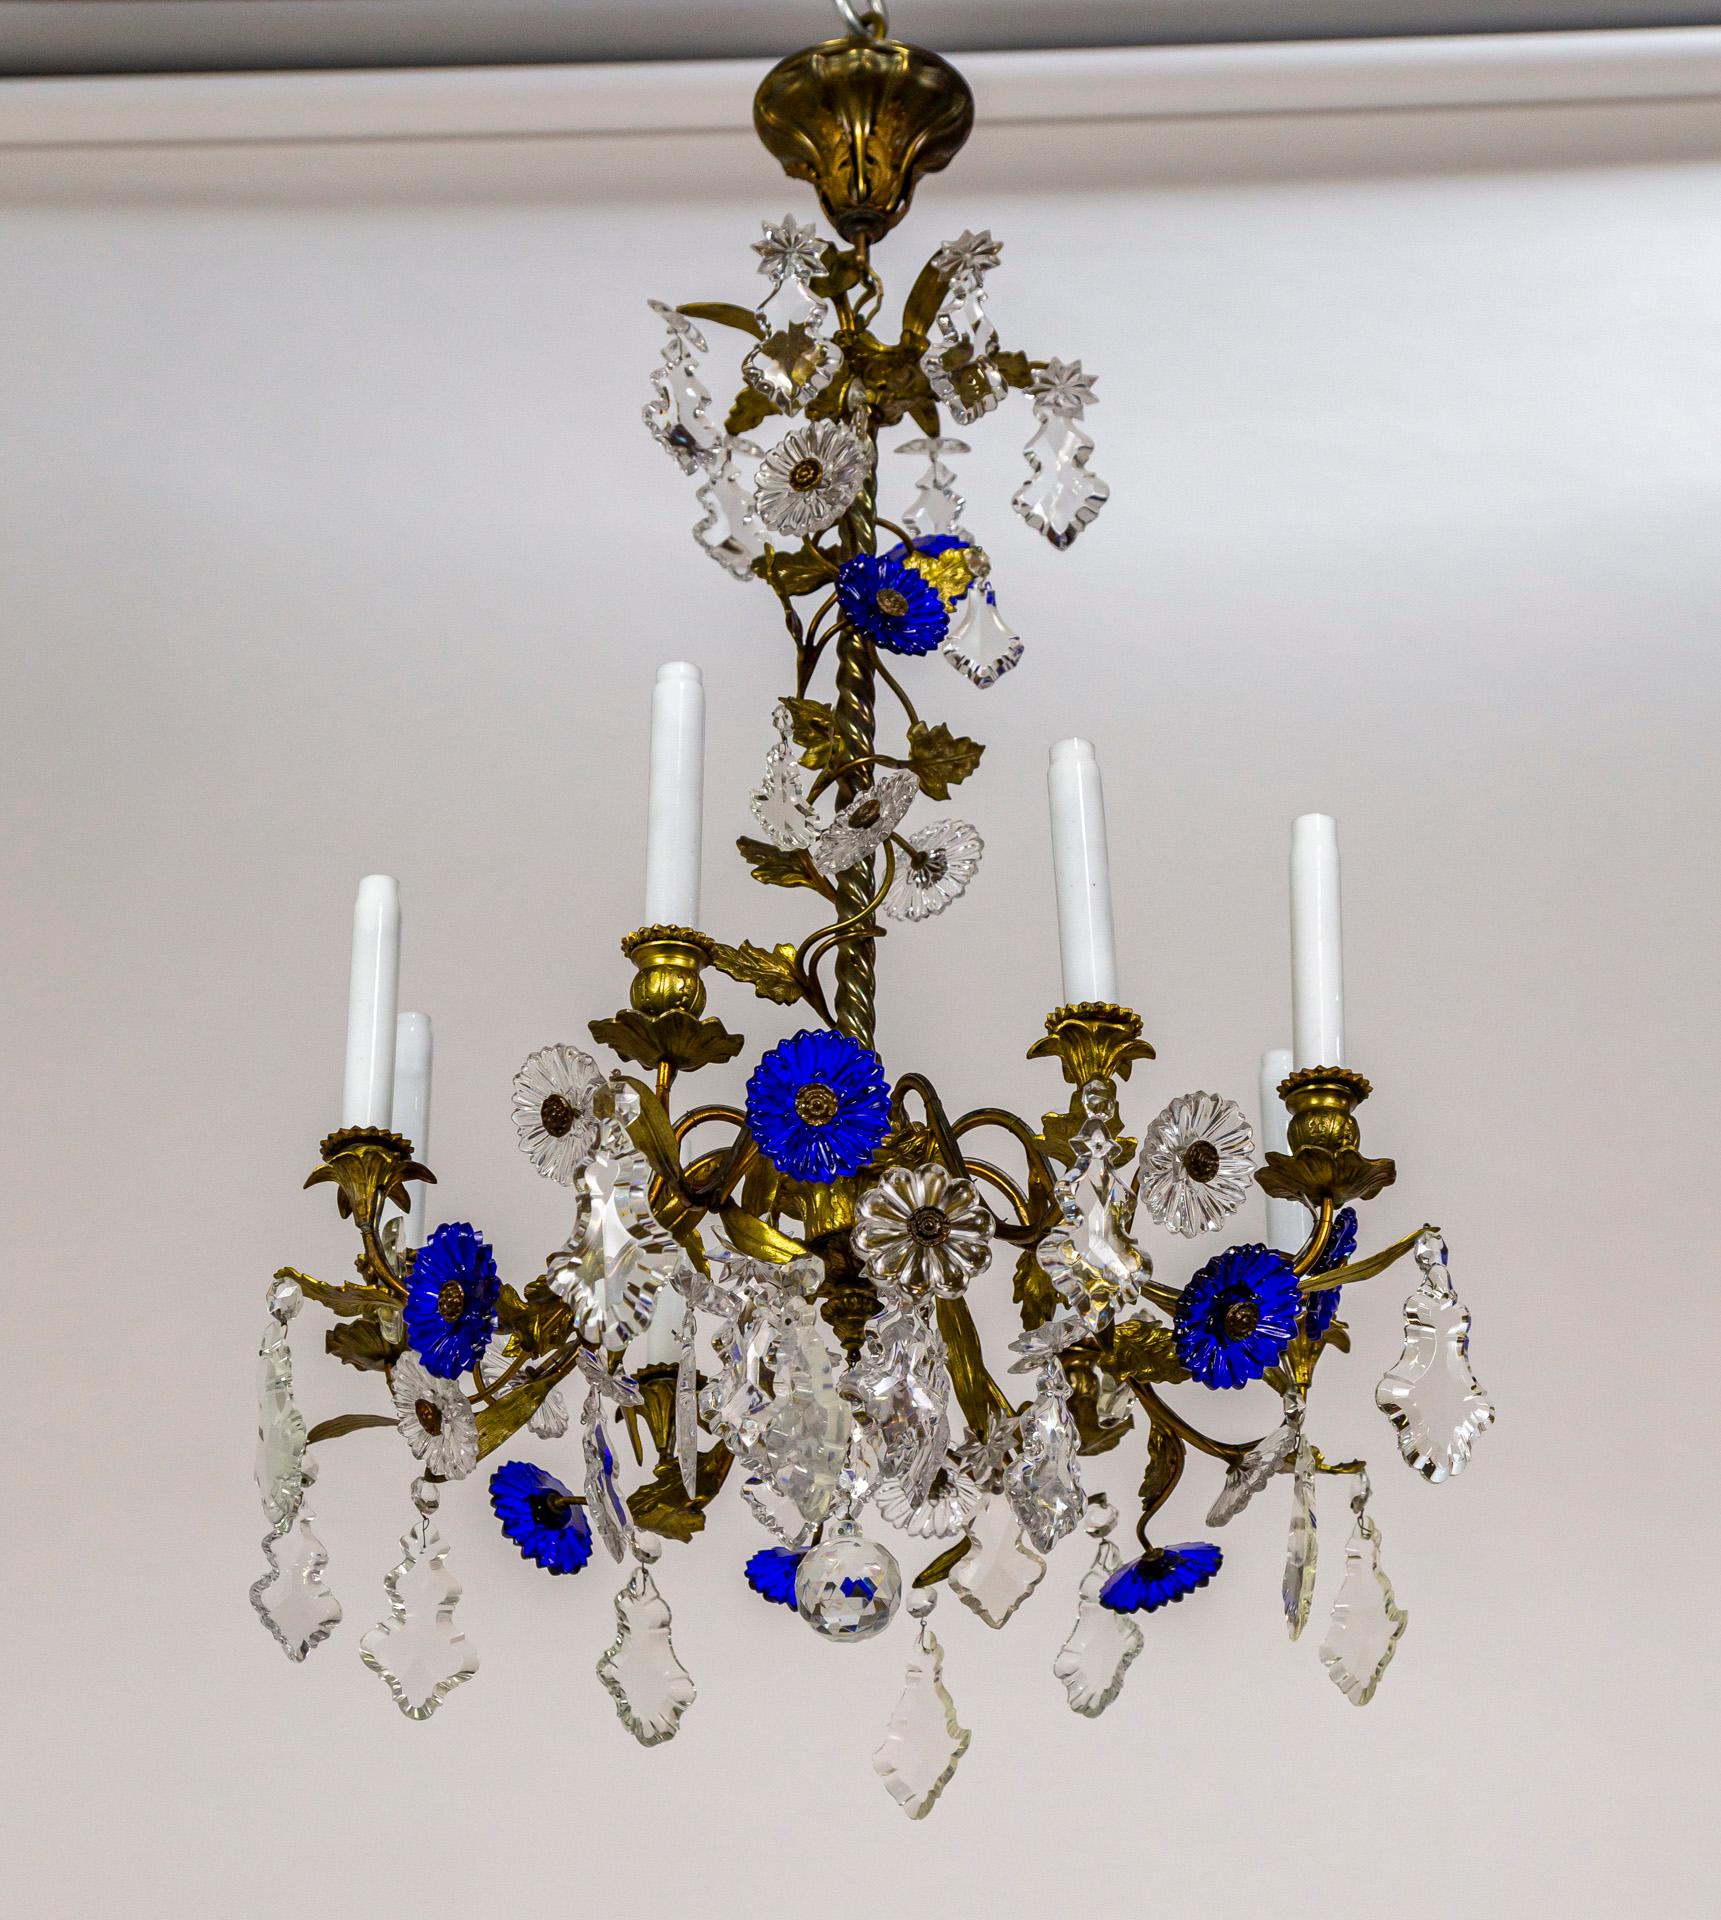 An Art Nouveau, 8-light chandelier with vibrant, deep blue molded crystal flowers and clear crystals in varying shapes. Unique in that arms vary in height for added interest; alternating designs of decorative, floral details on the cast brass candle